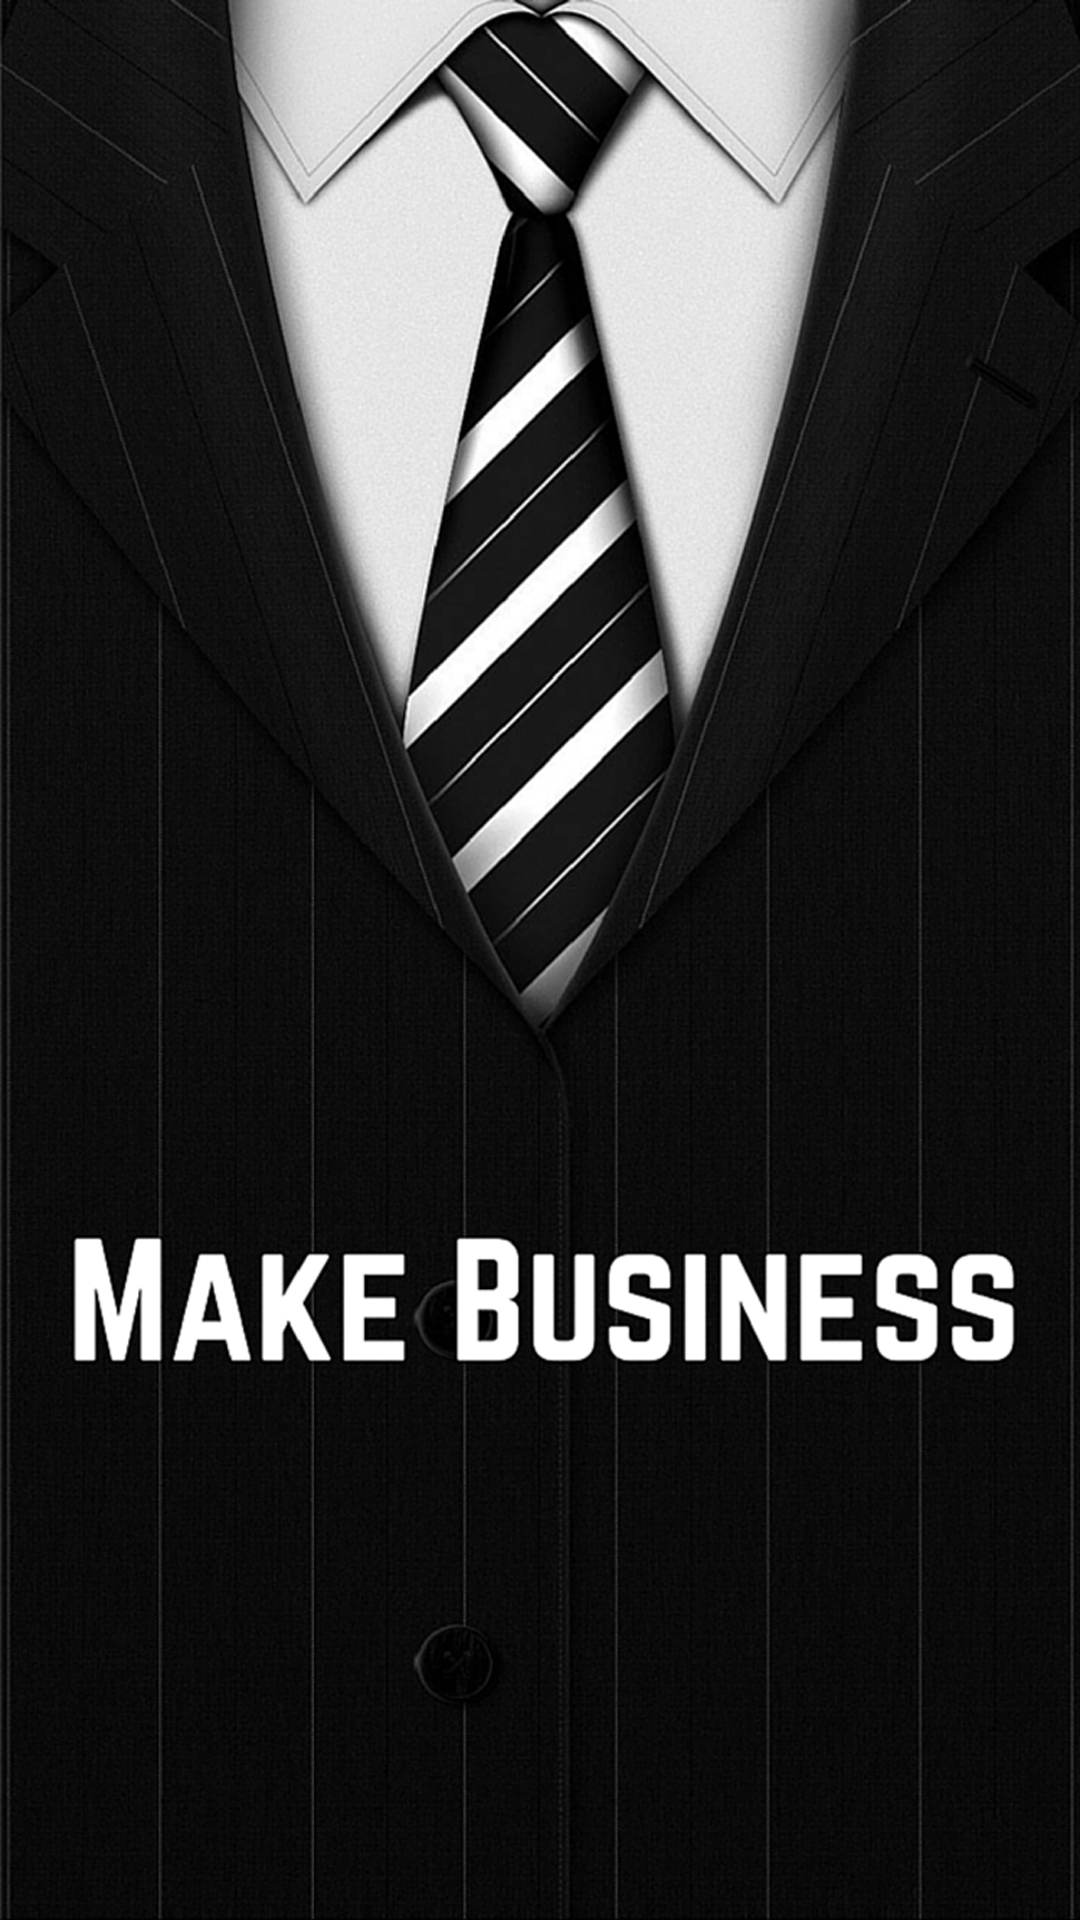 Business Background Images, HD Pictures For Free Vectors Download -  Lovepik.com